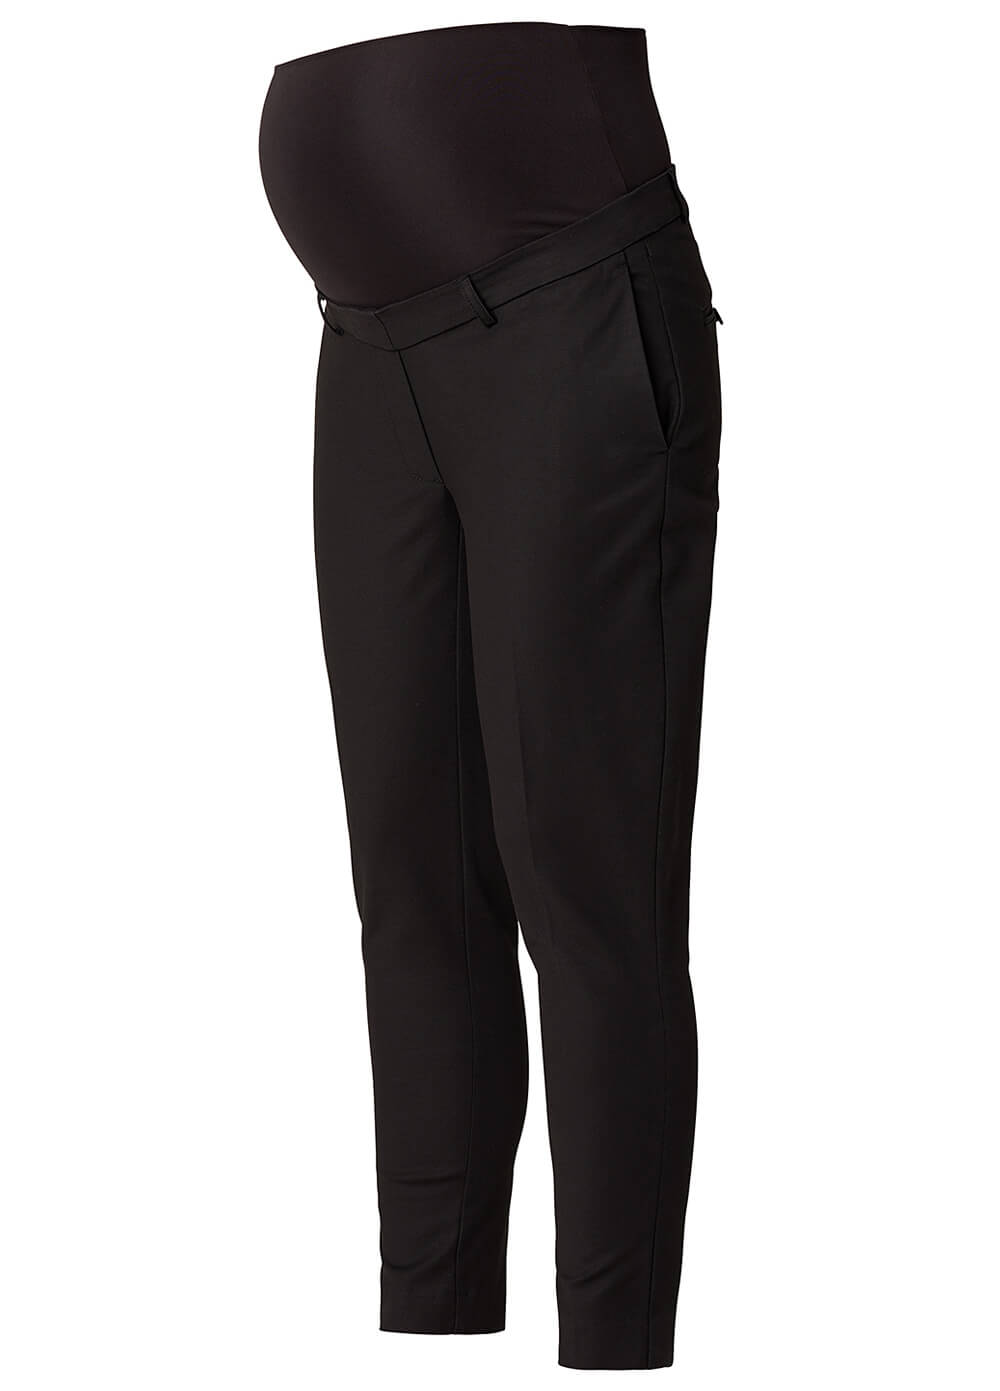 Black Maternity Business Trousers by Queen mum